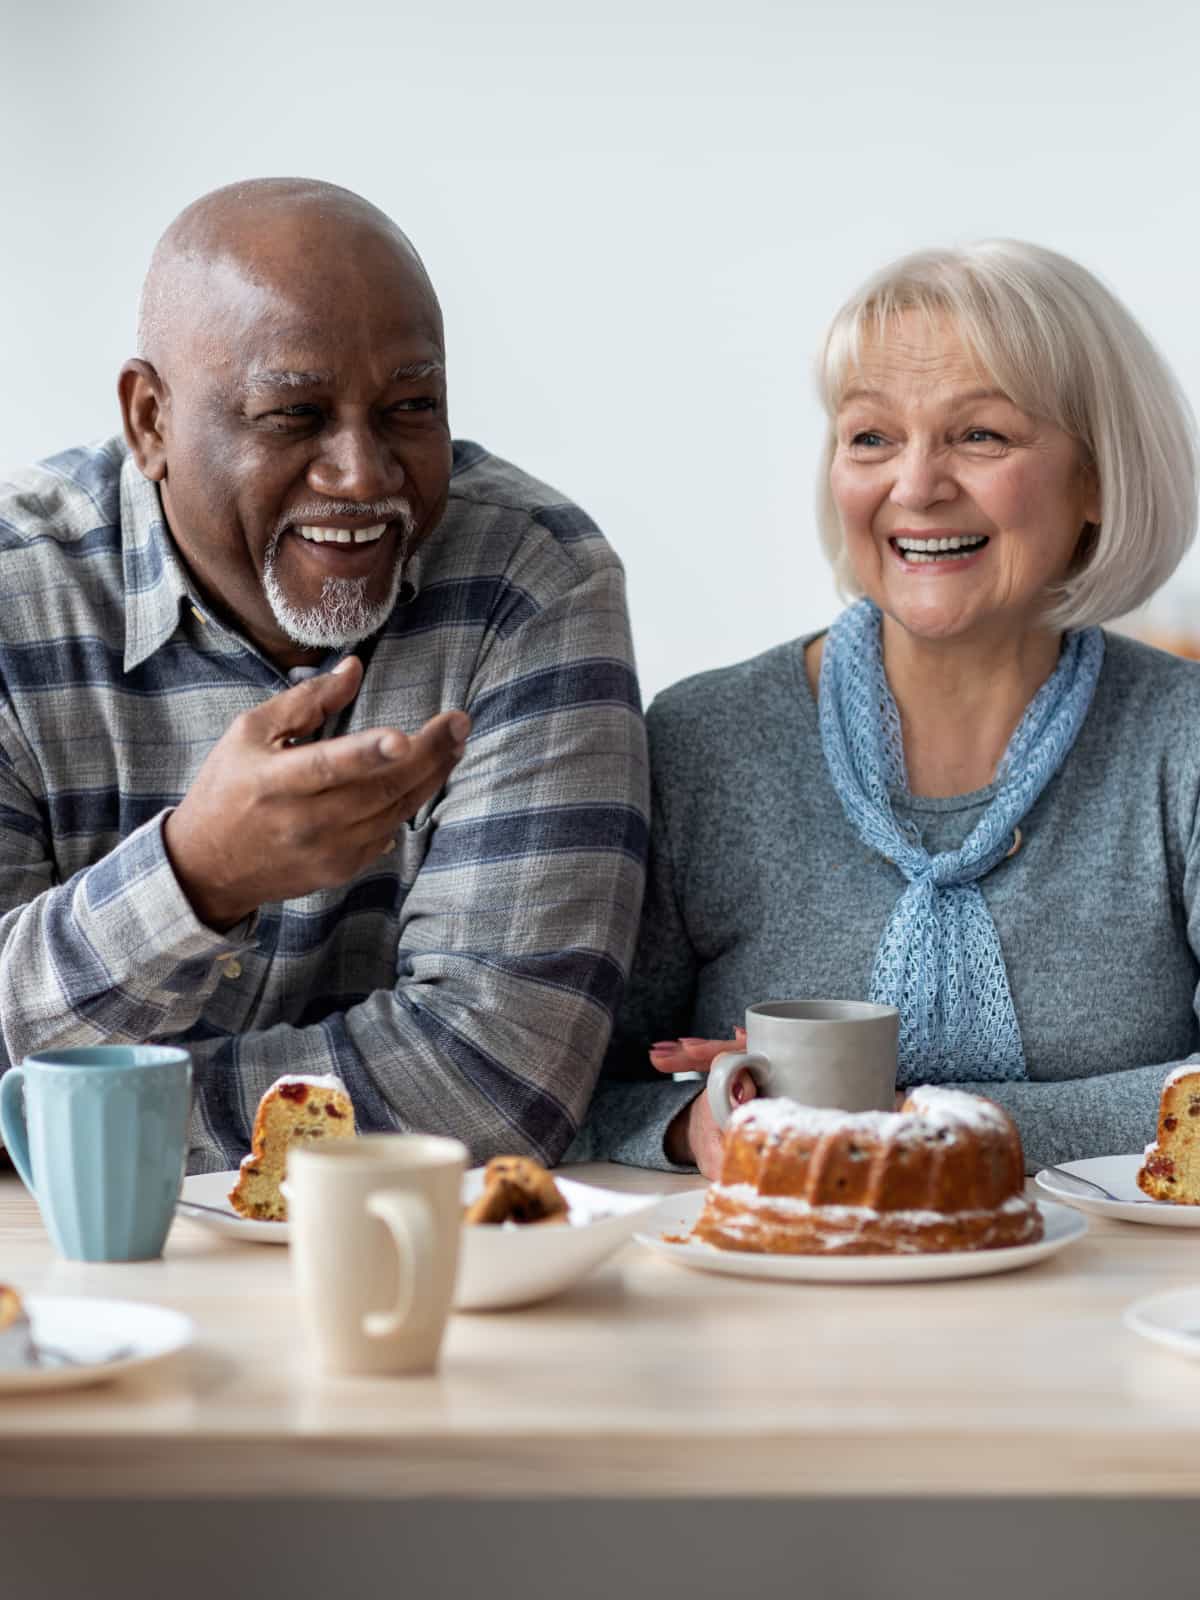 A senior couple smile and laugh while having coffee and cake together.